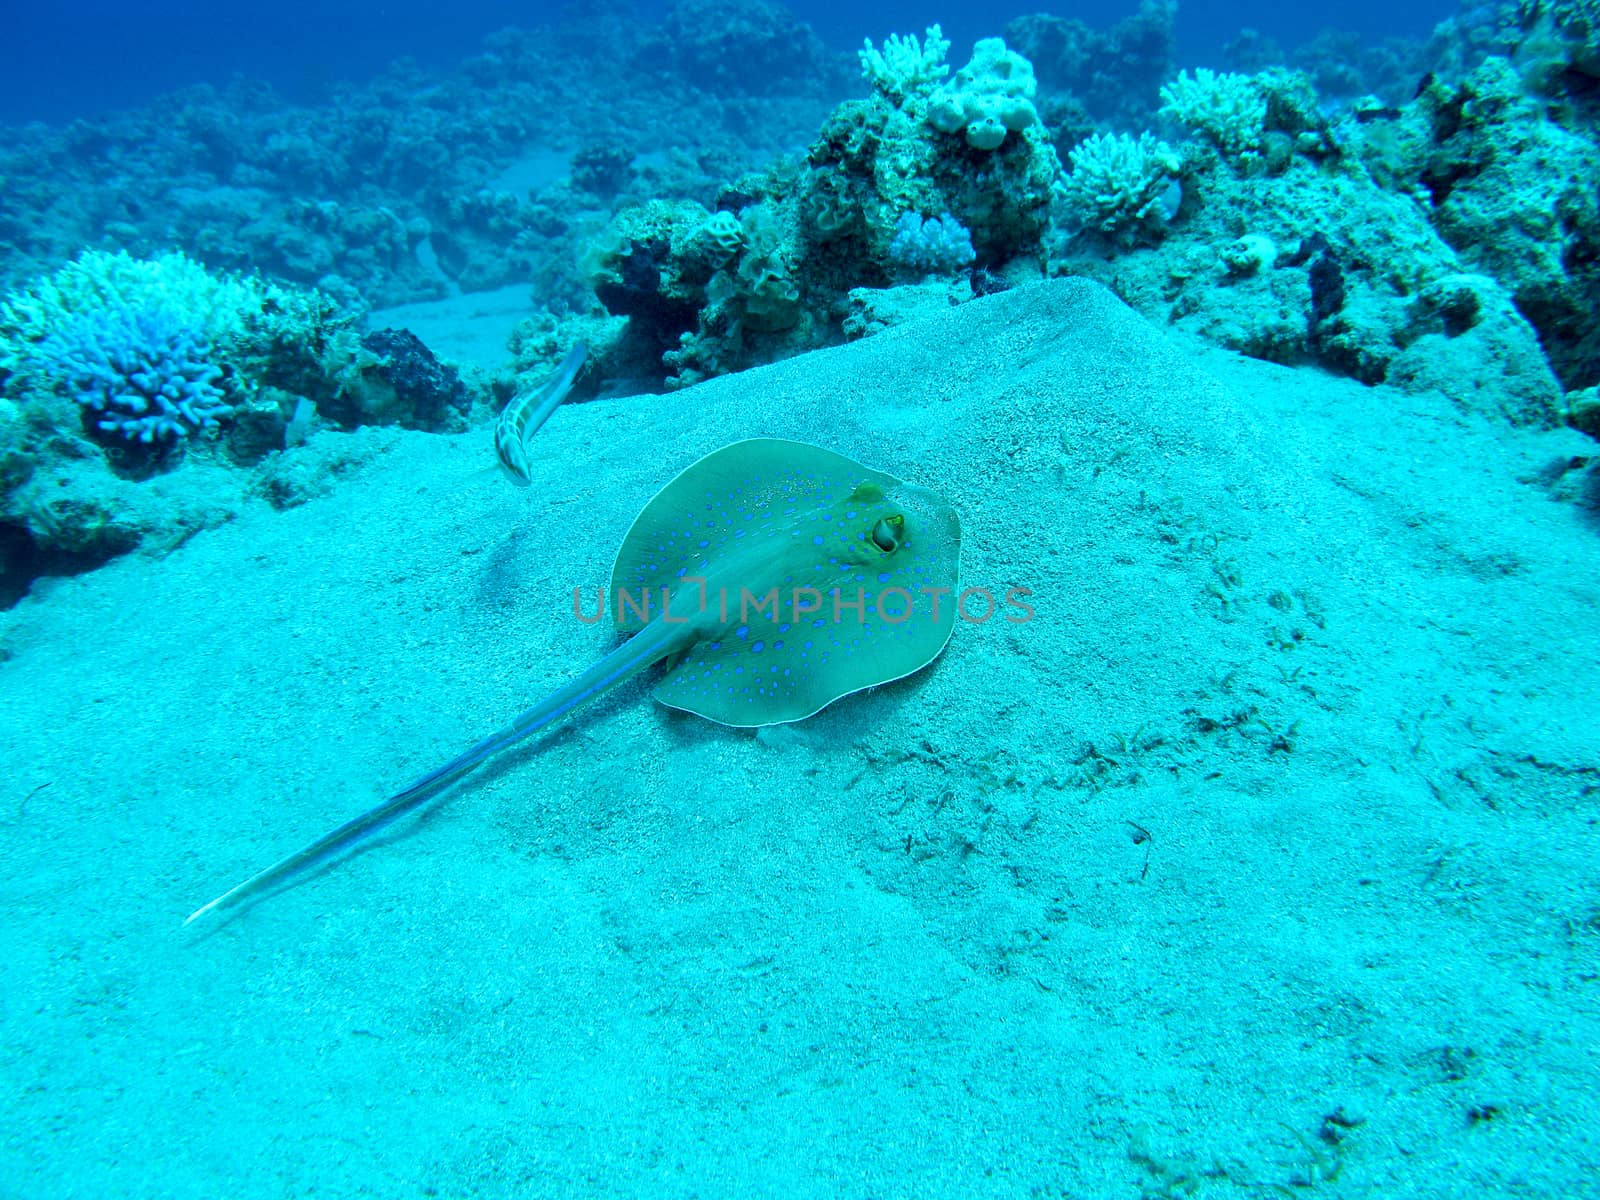 Bluespotted ray (Taeniura lymma) at the bottom of tropical sea, underwater